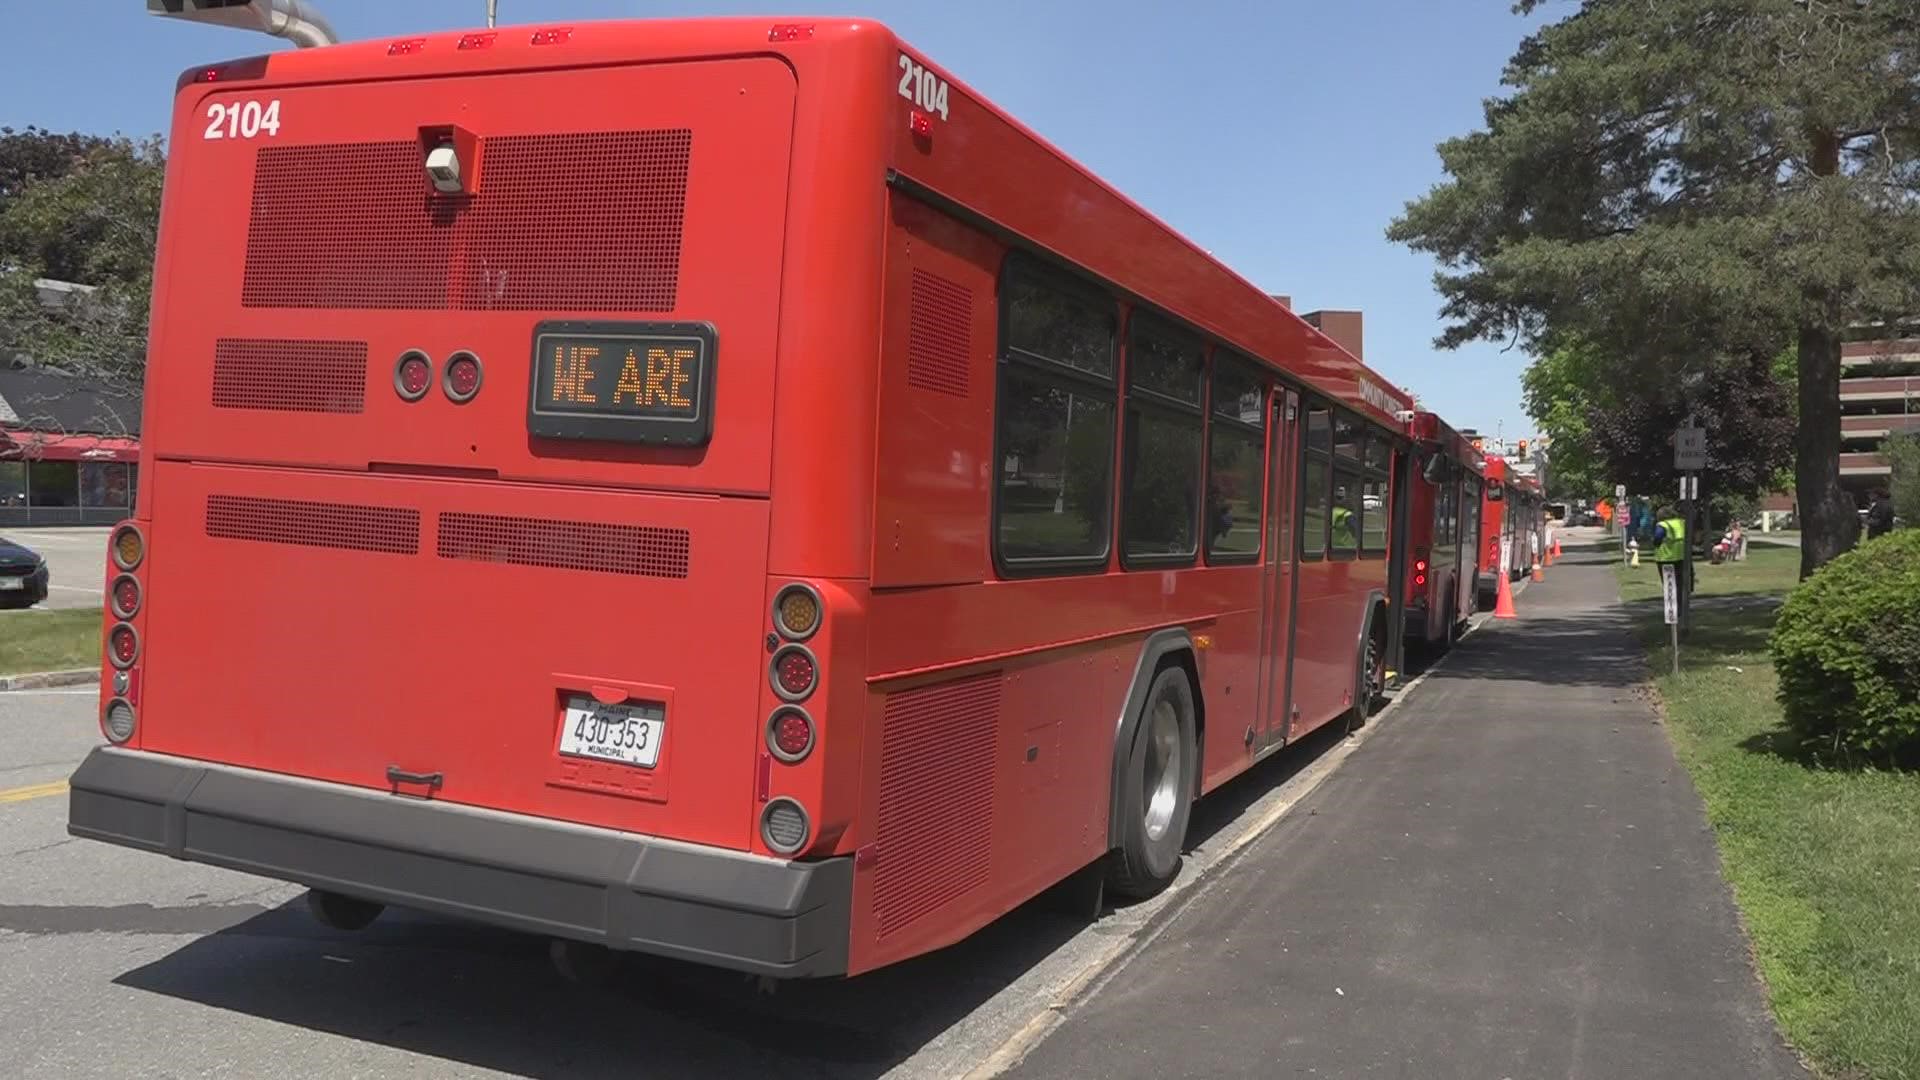 The temporary stop of bus service goes into effect on Saturday, June 18, and applies to both the fixed route and ADA paratransit service, per a city release.